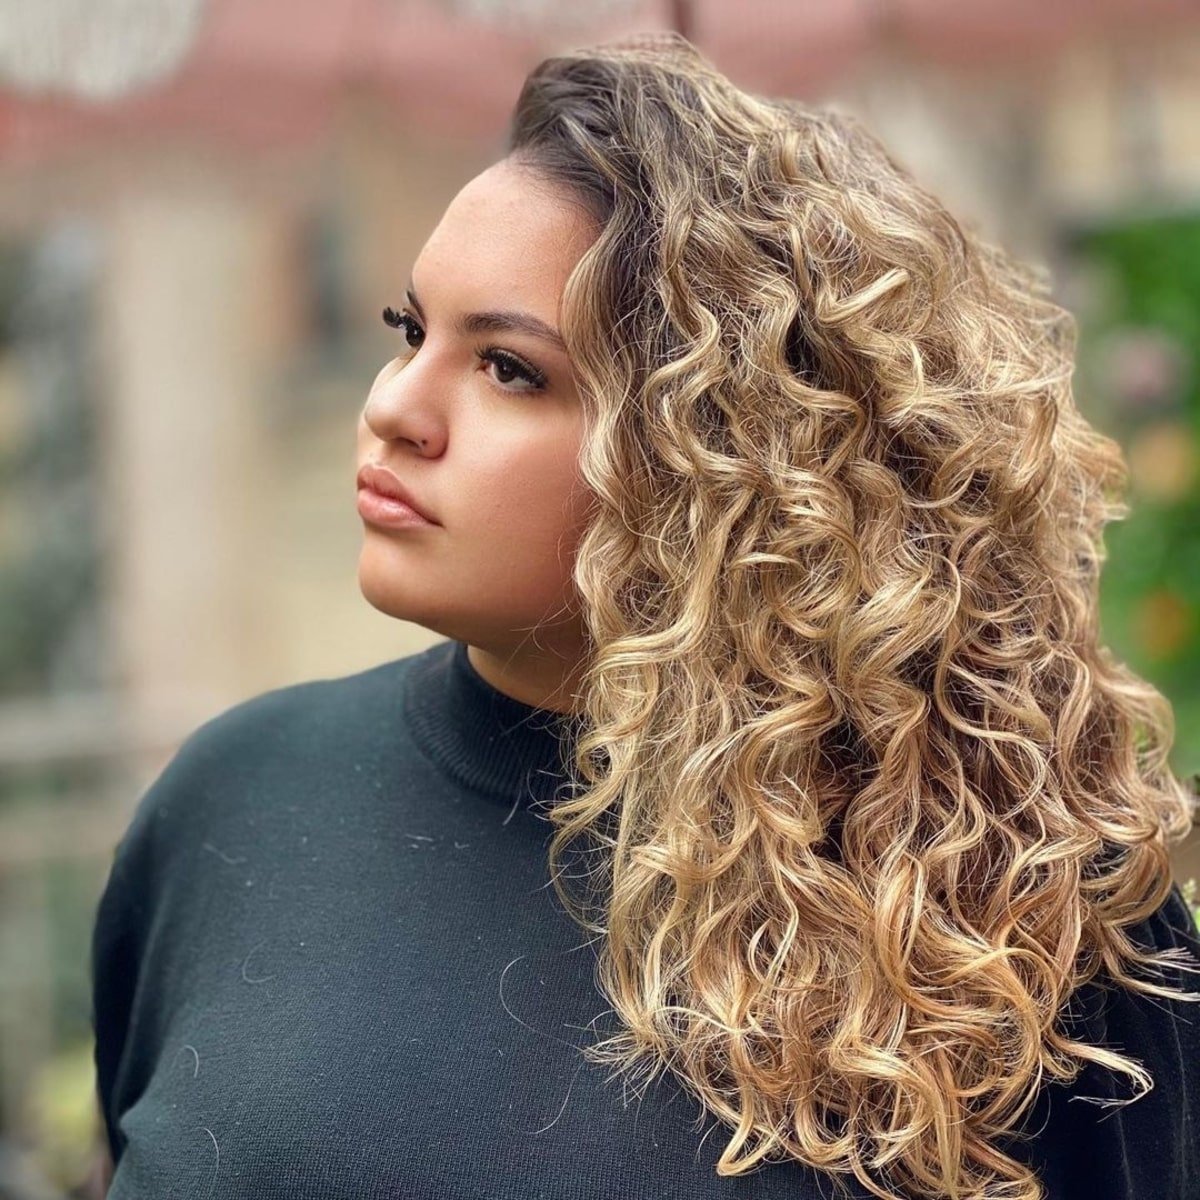 Long-length haircut with blonde bouncy curls